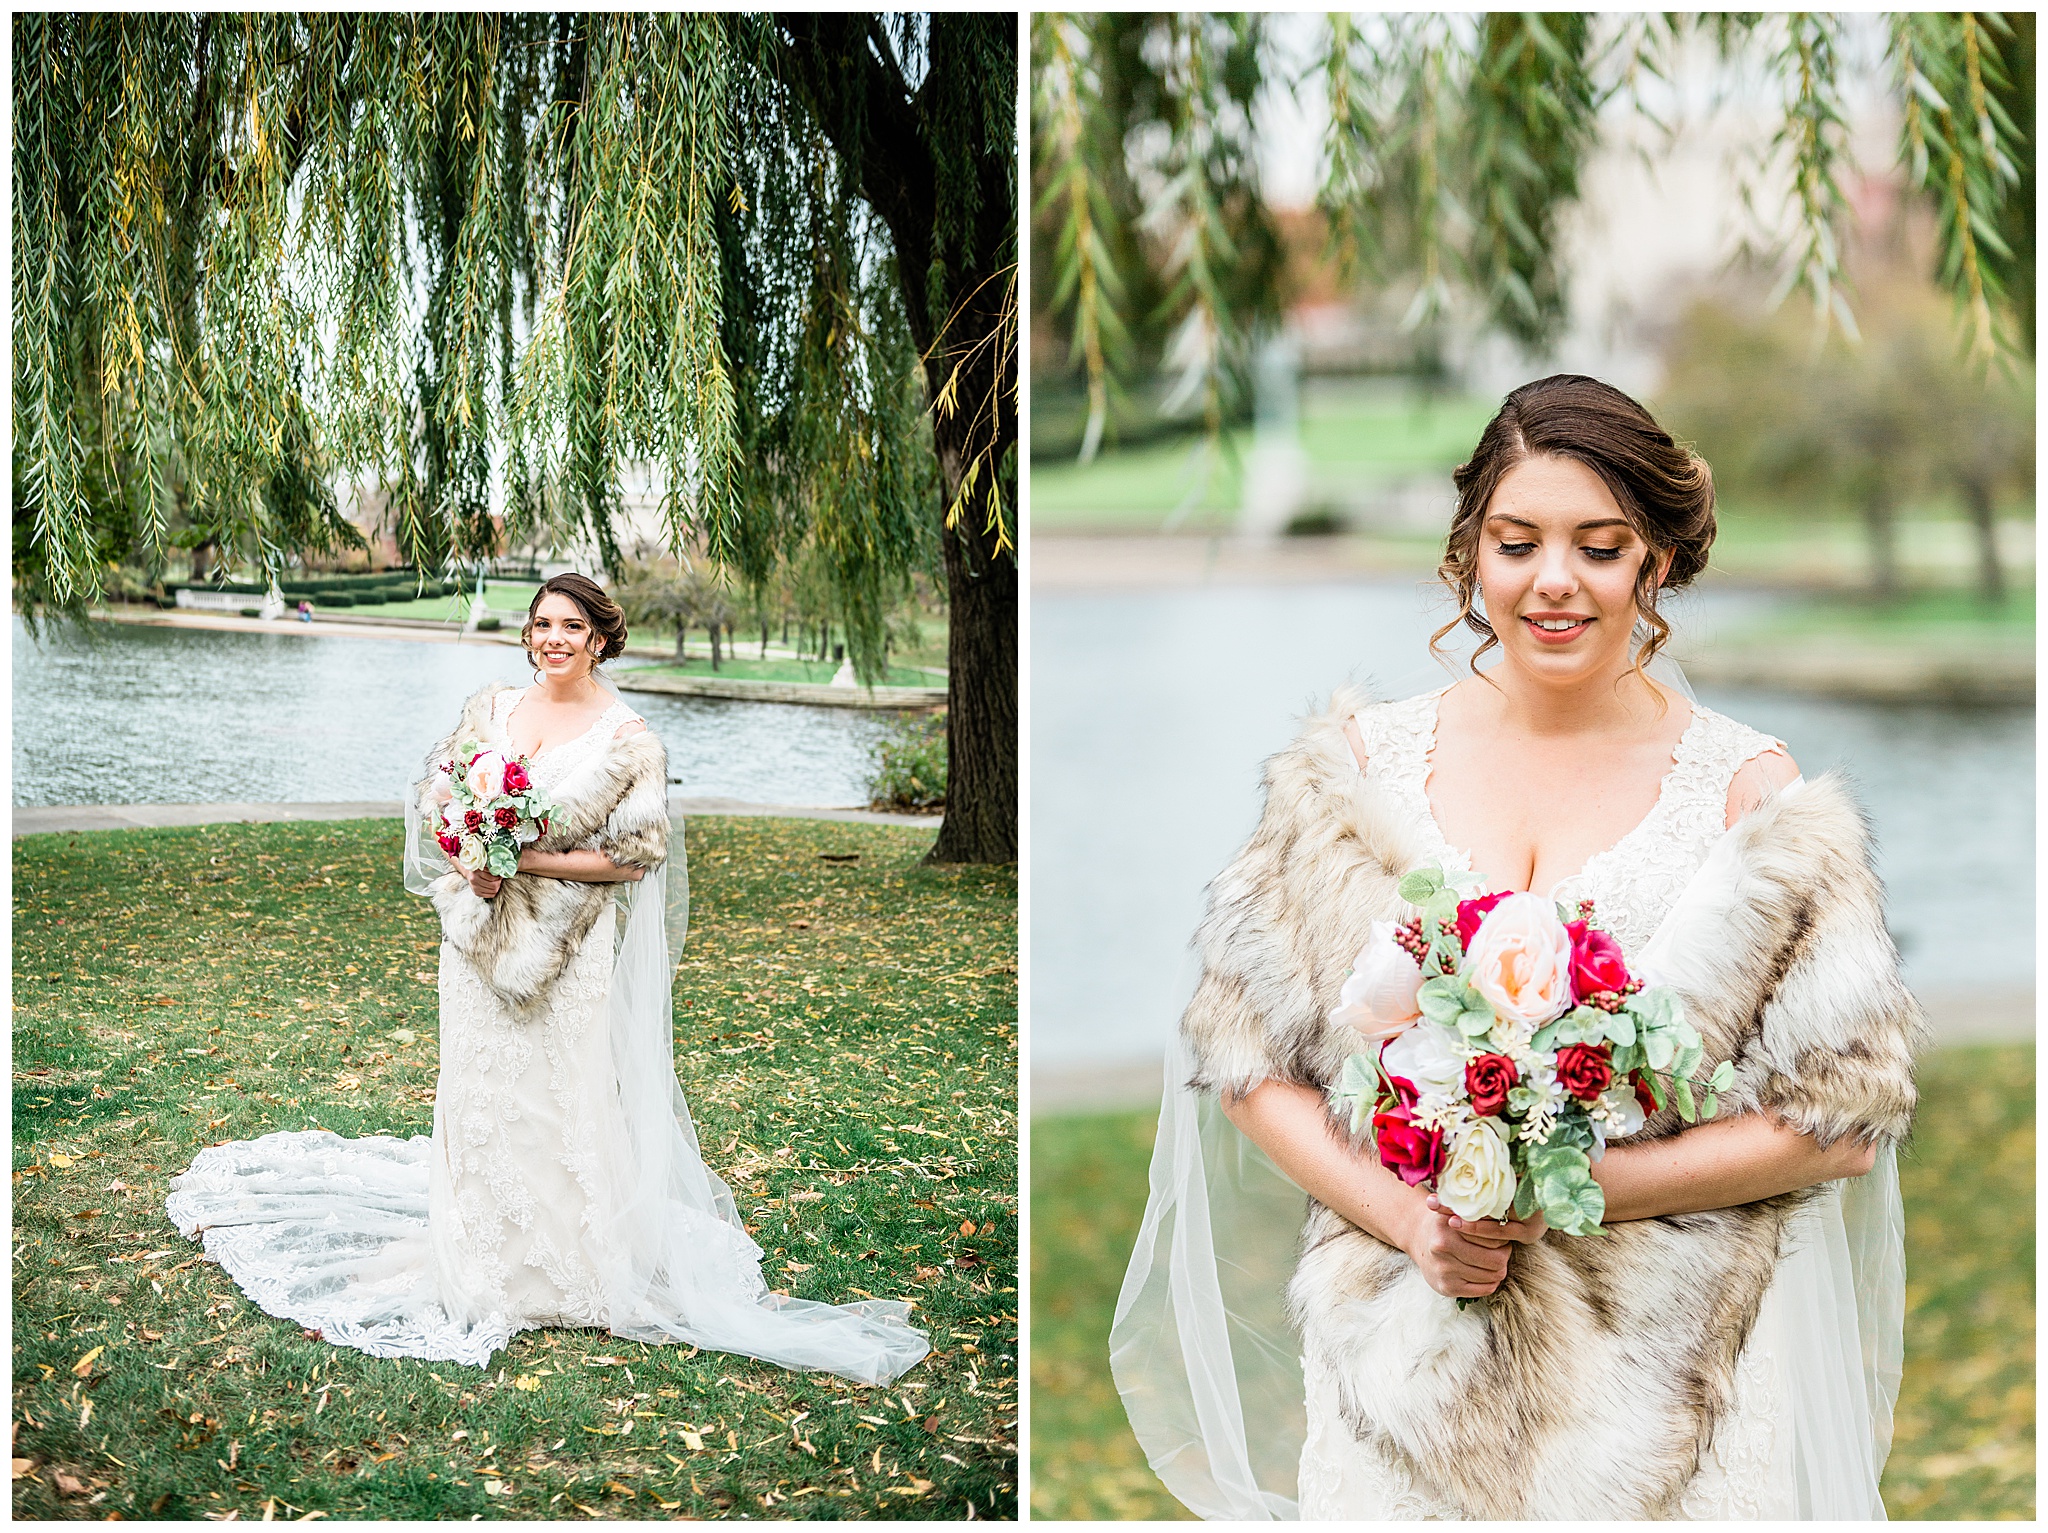 BRIDE UNDER A WEEPING WILLOW